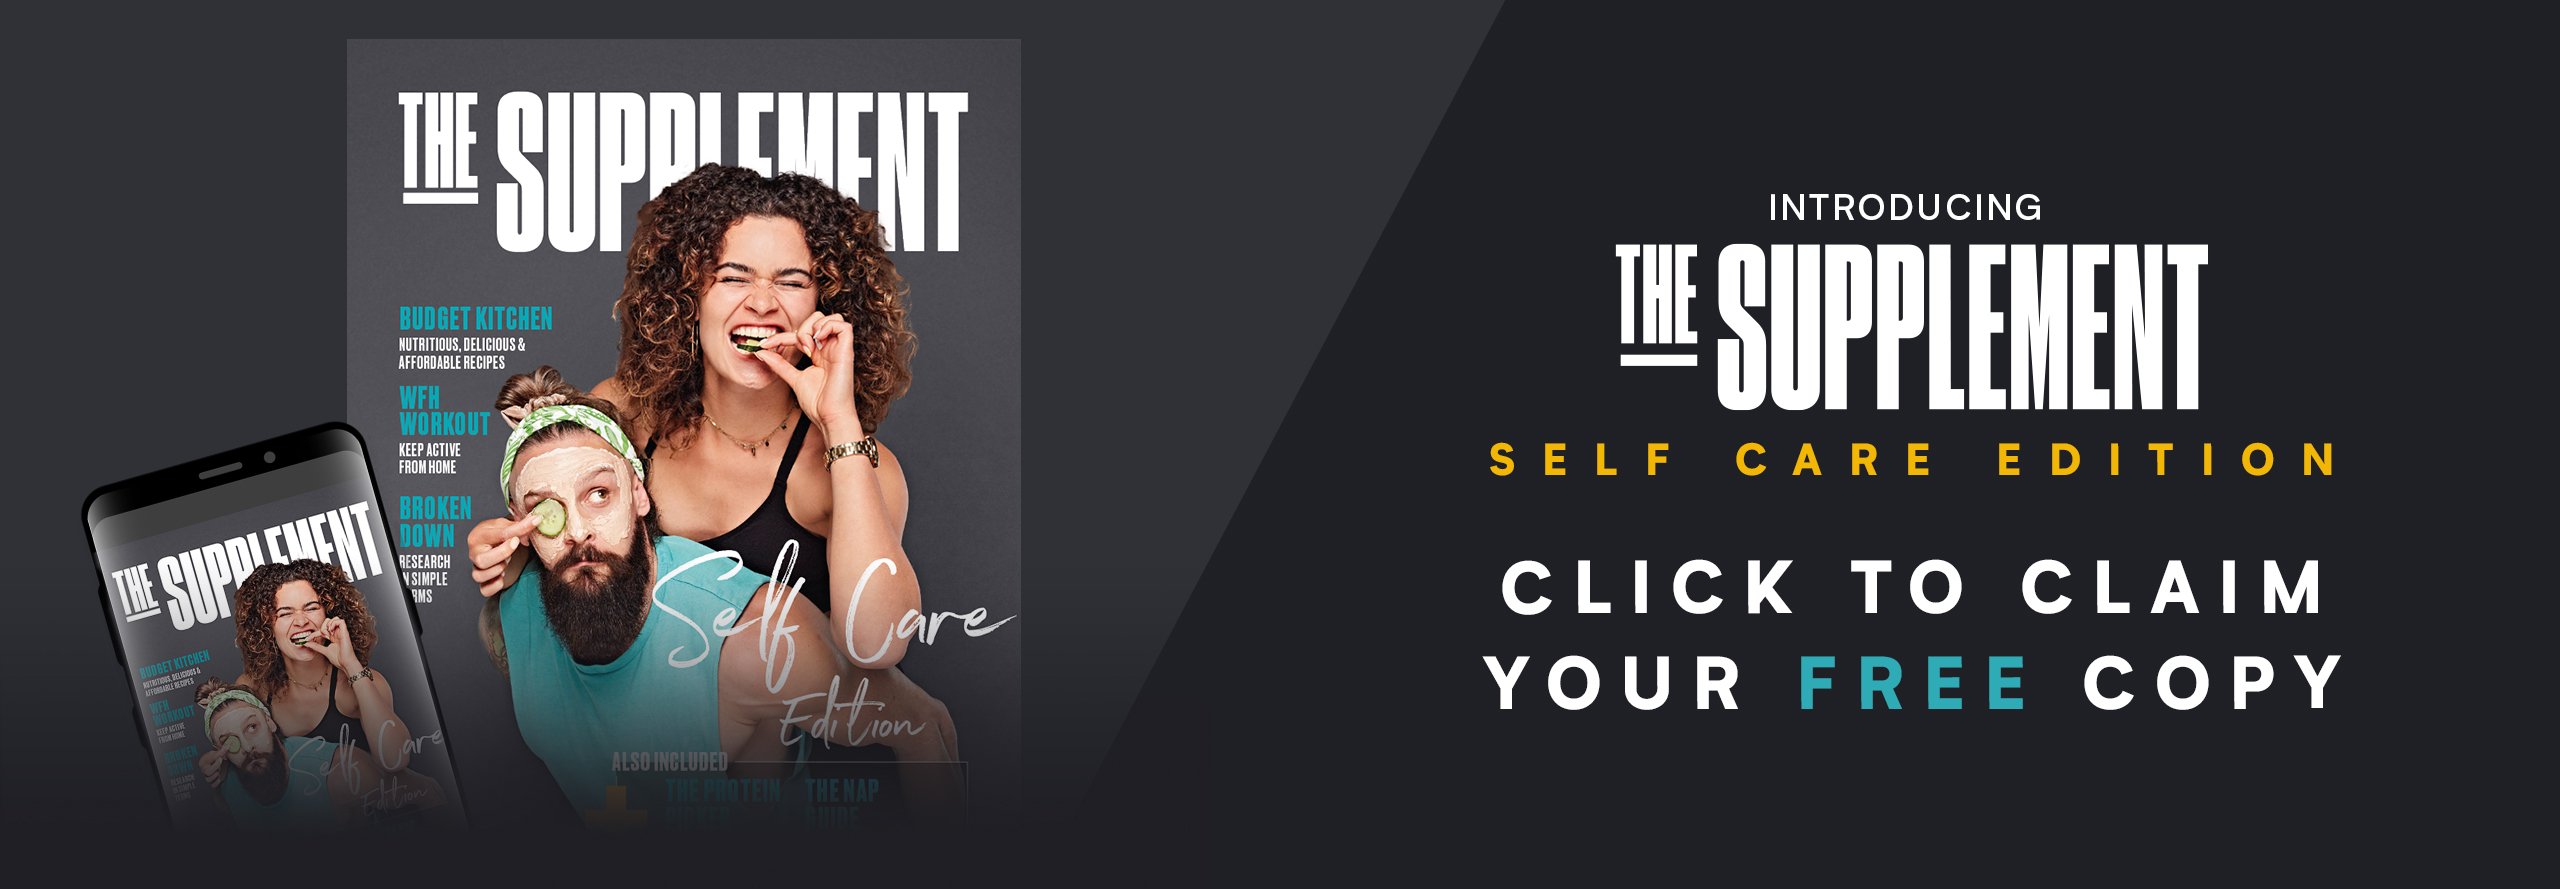 click to claim a free digital copy of The Supplement Self Care Edition